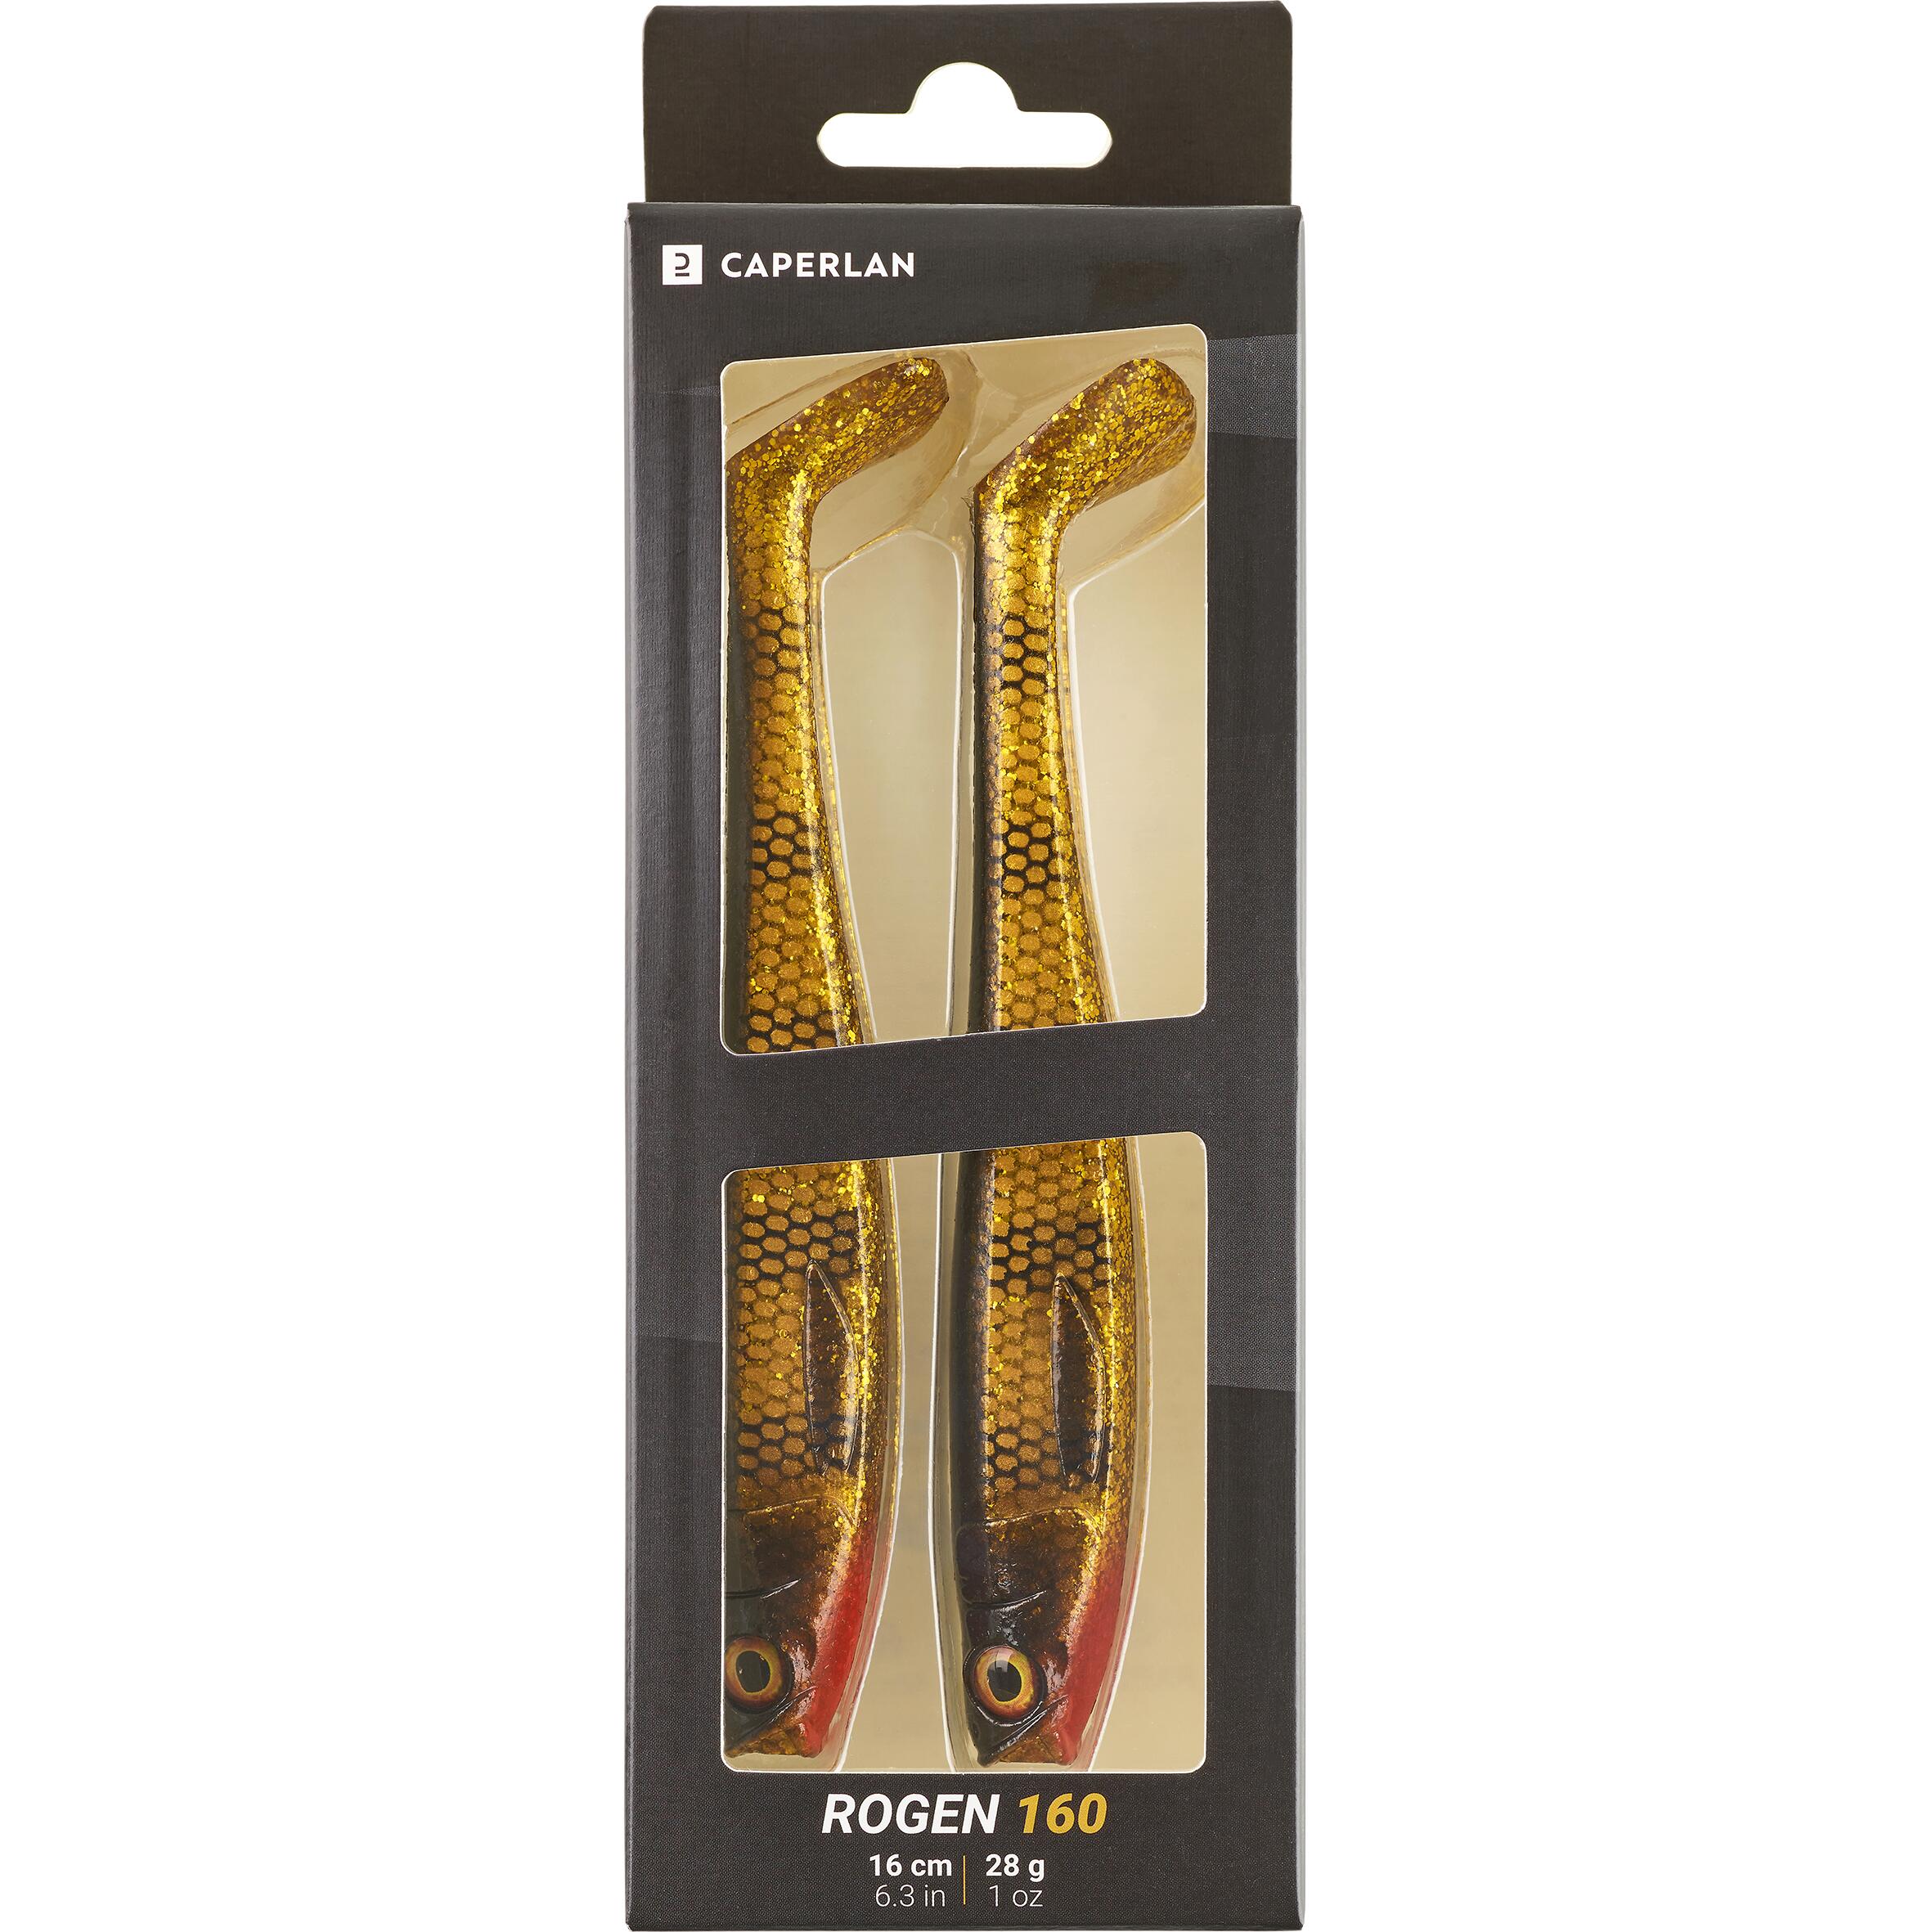 ROGEN SOFT SHAD PIKE LURE 160 GOLD X2 4/4